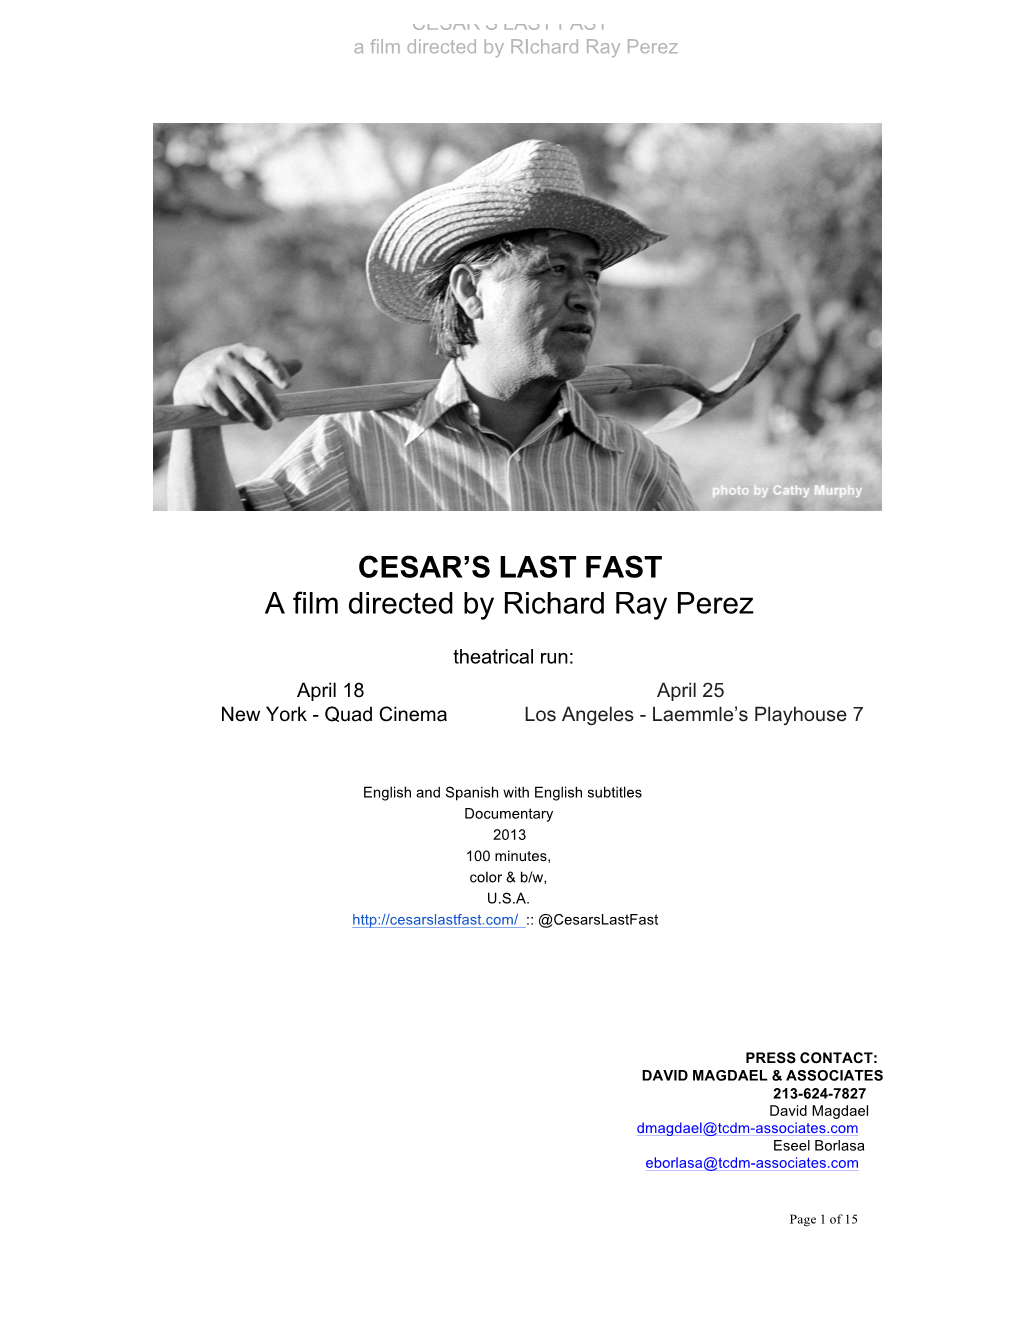 CESAR's LAST FAST a Film Directed by Richard Ray Perez